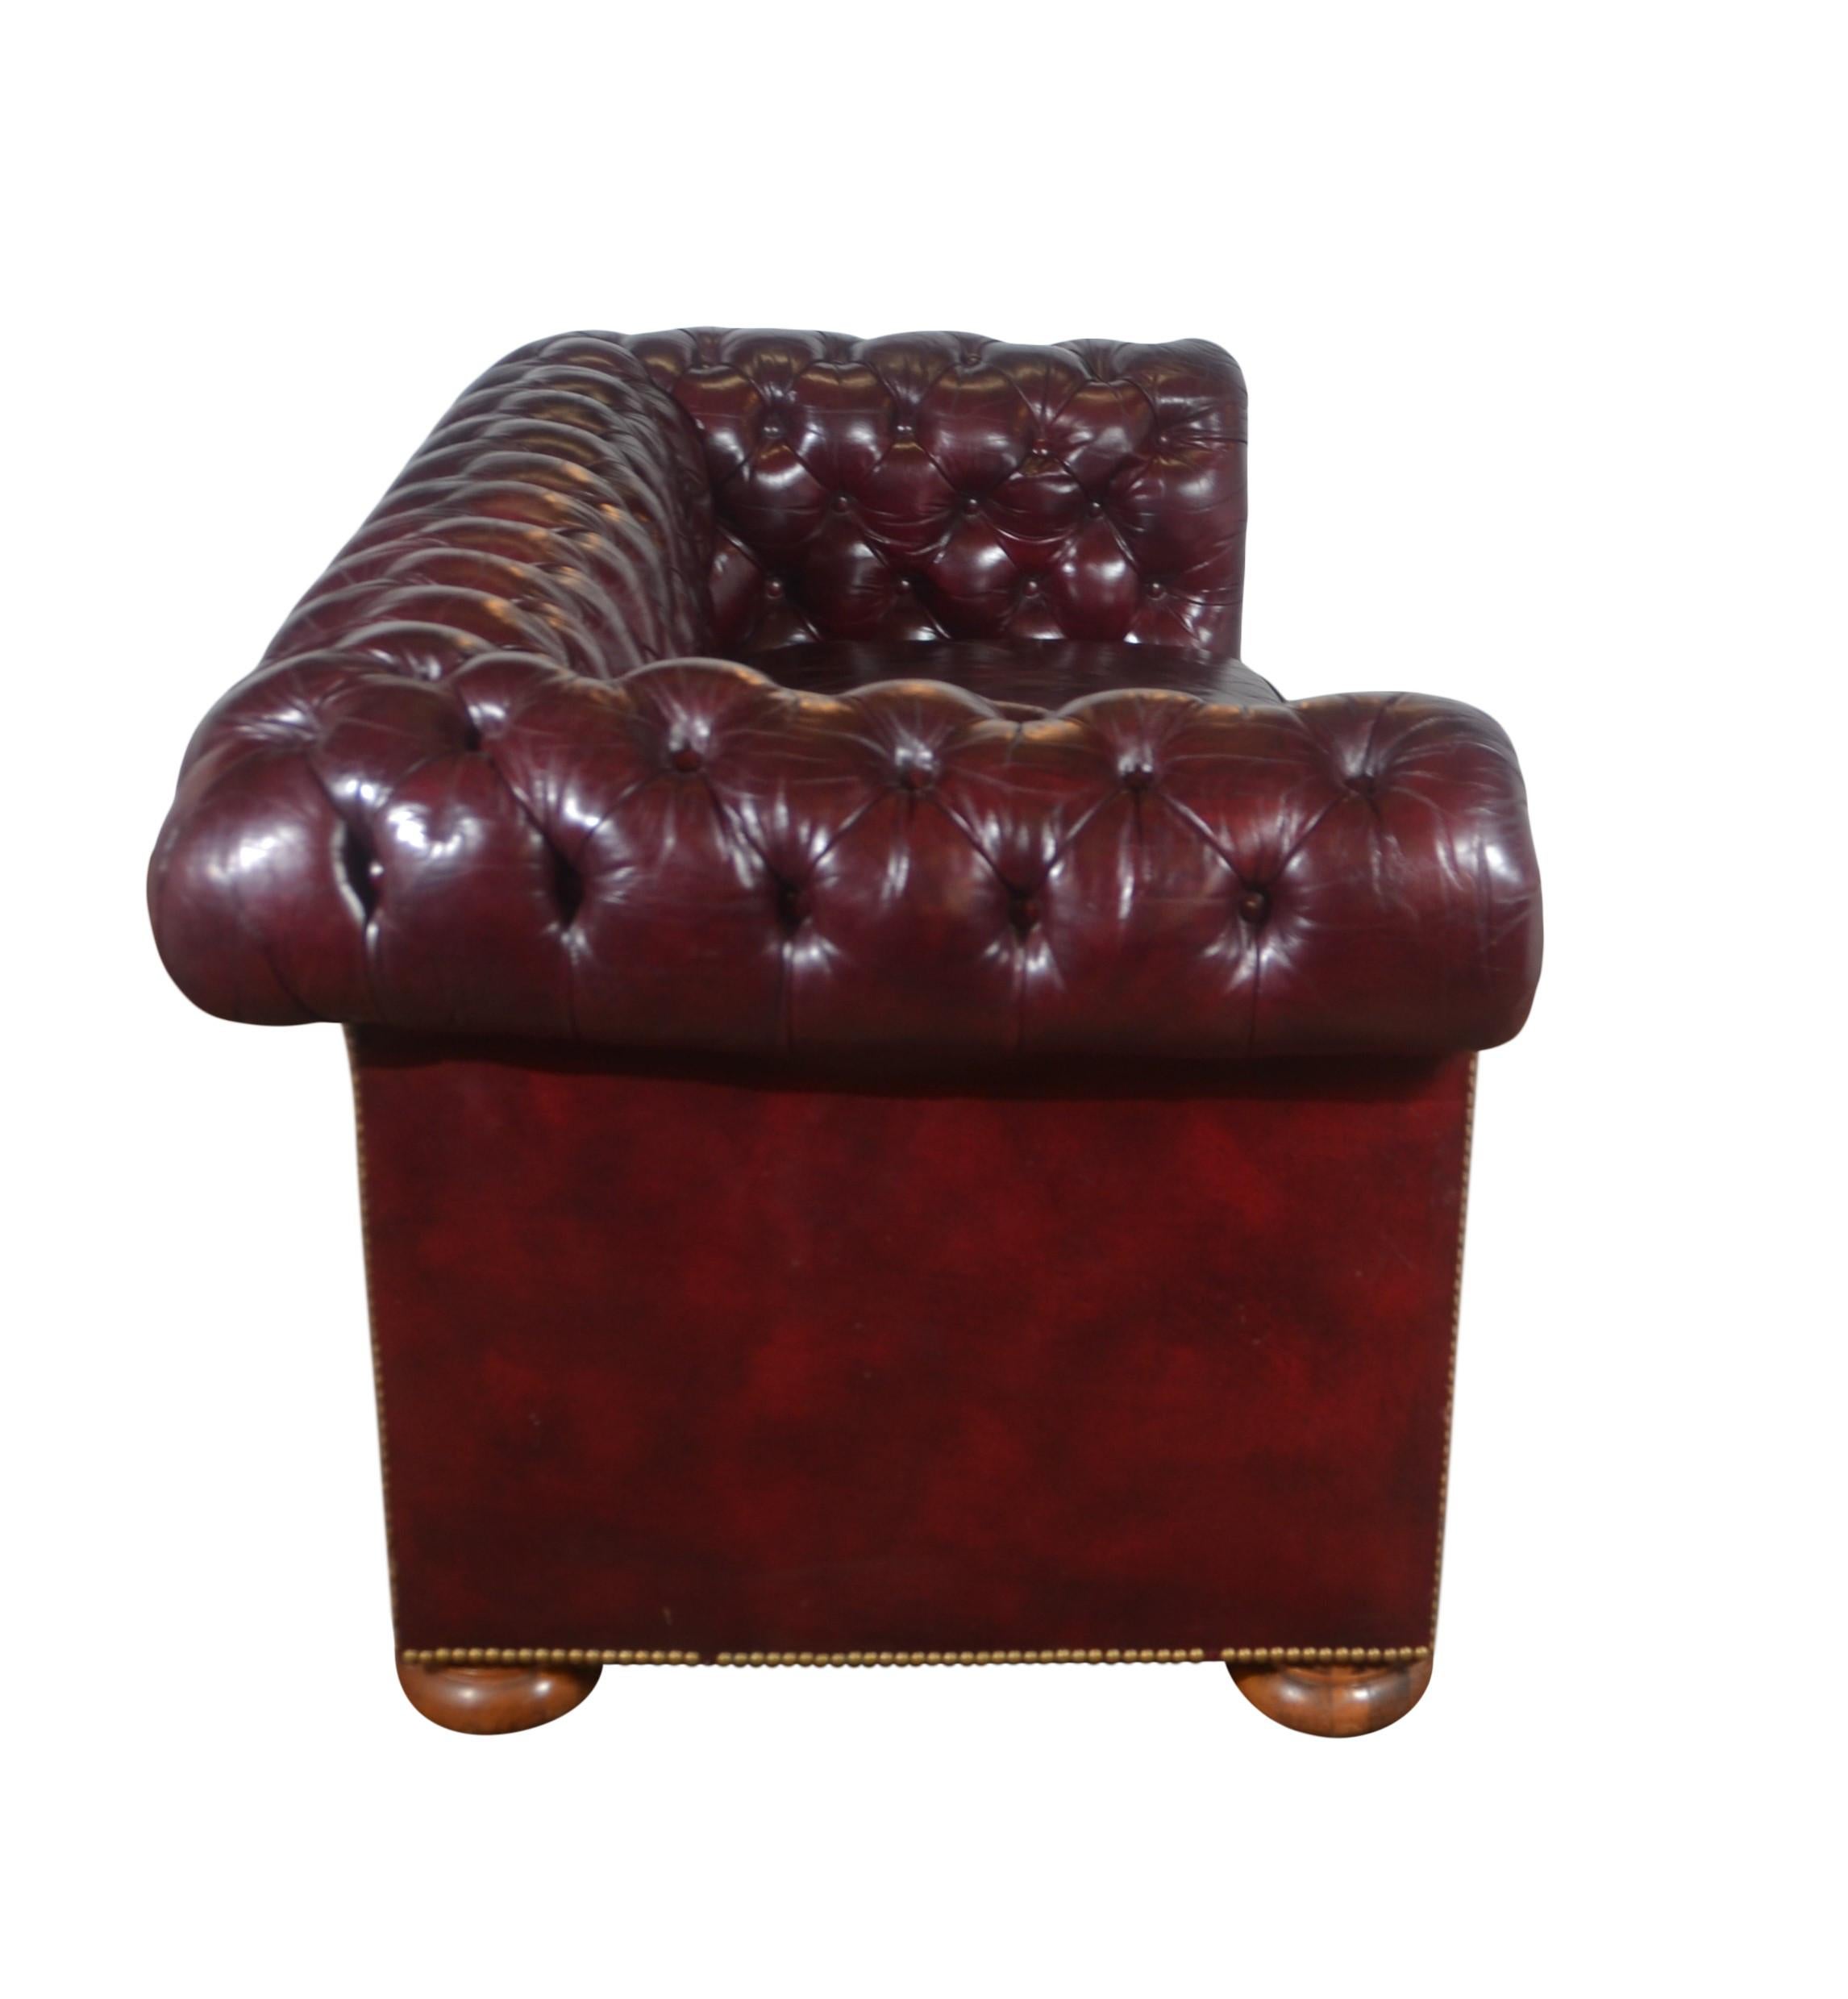 American Chesterfield Style Leather Loveseat by Hickory